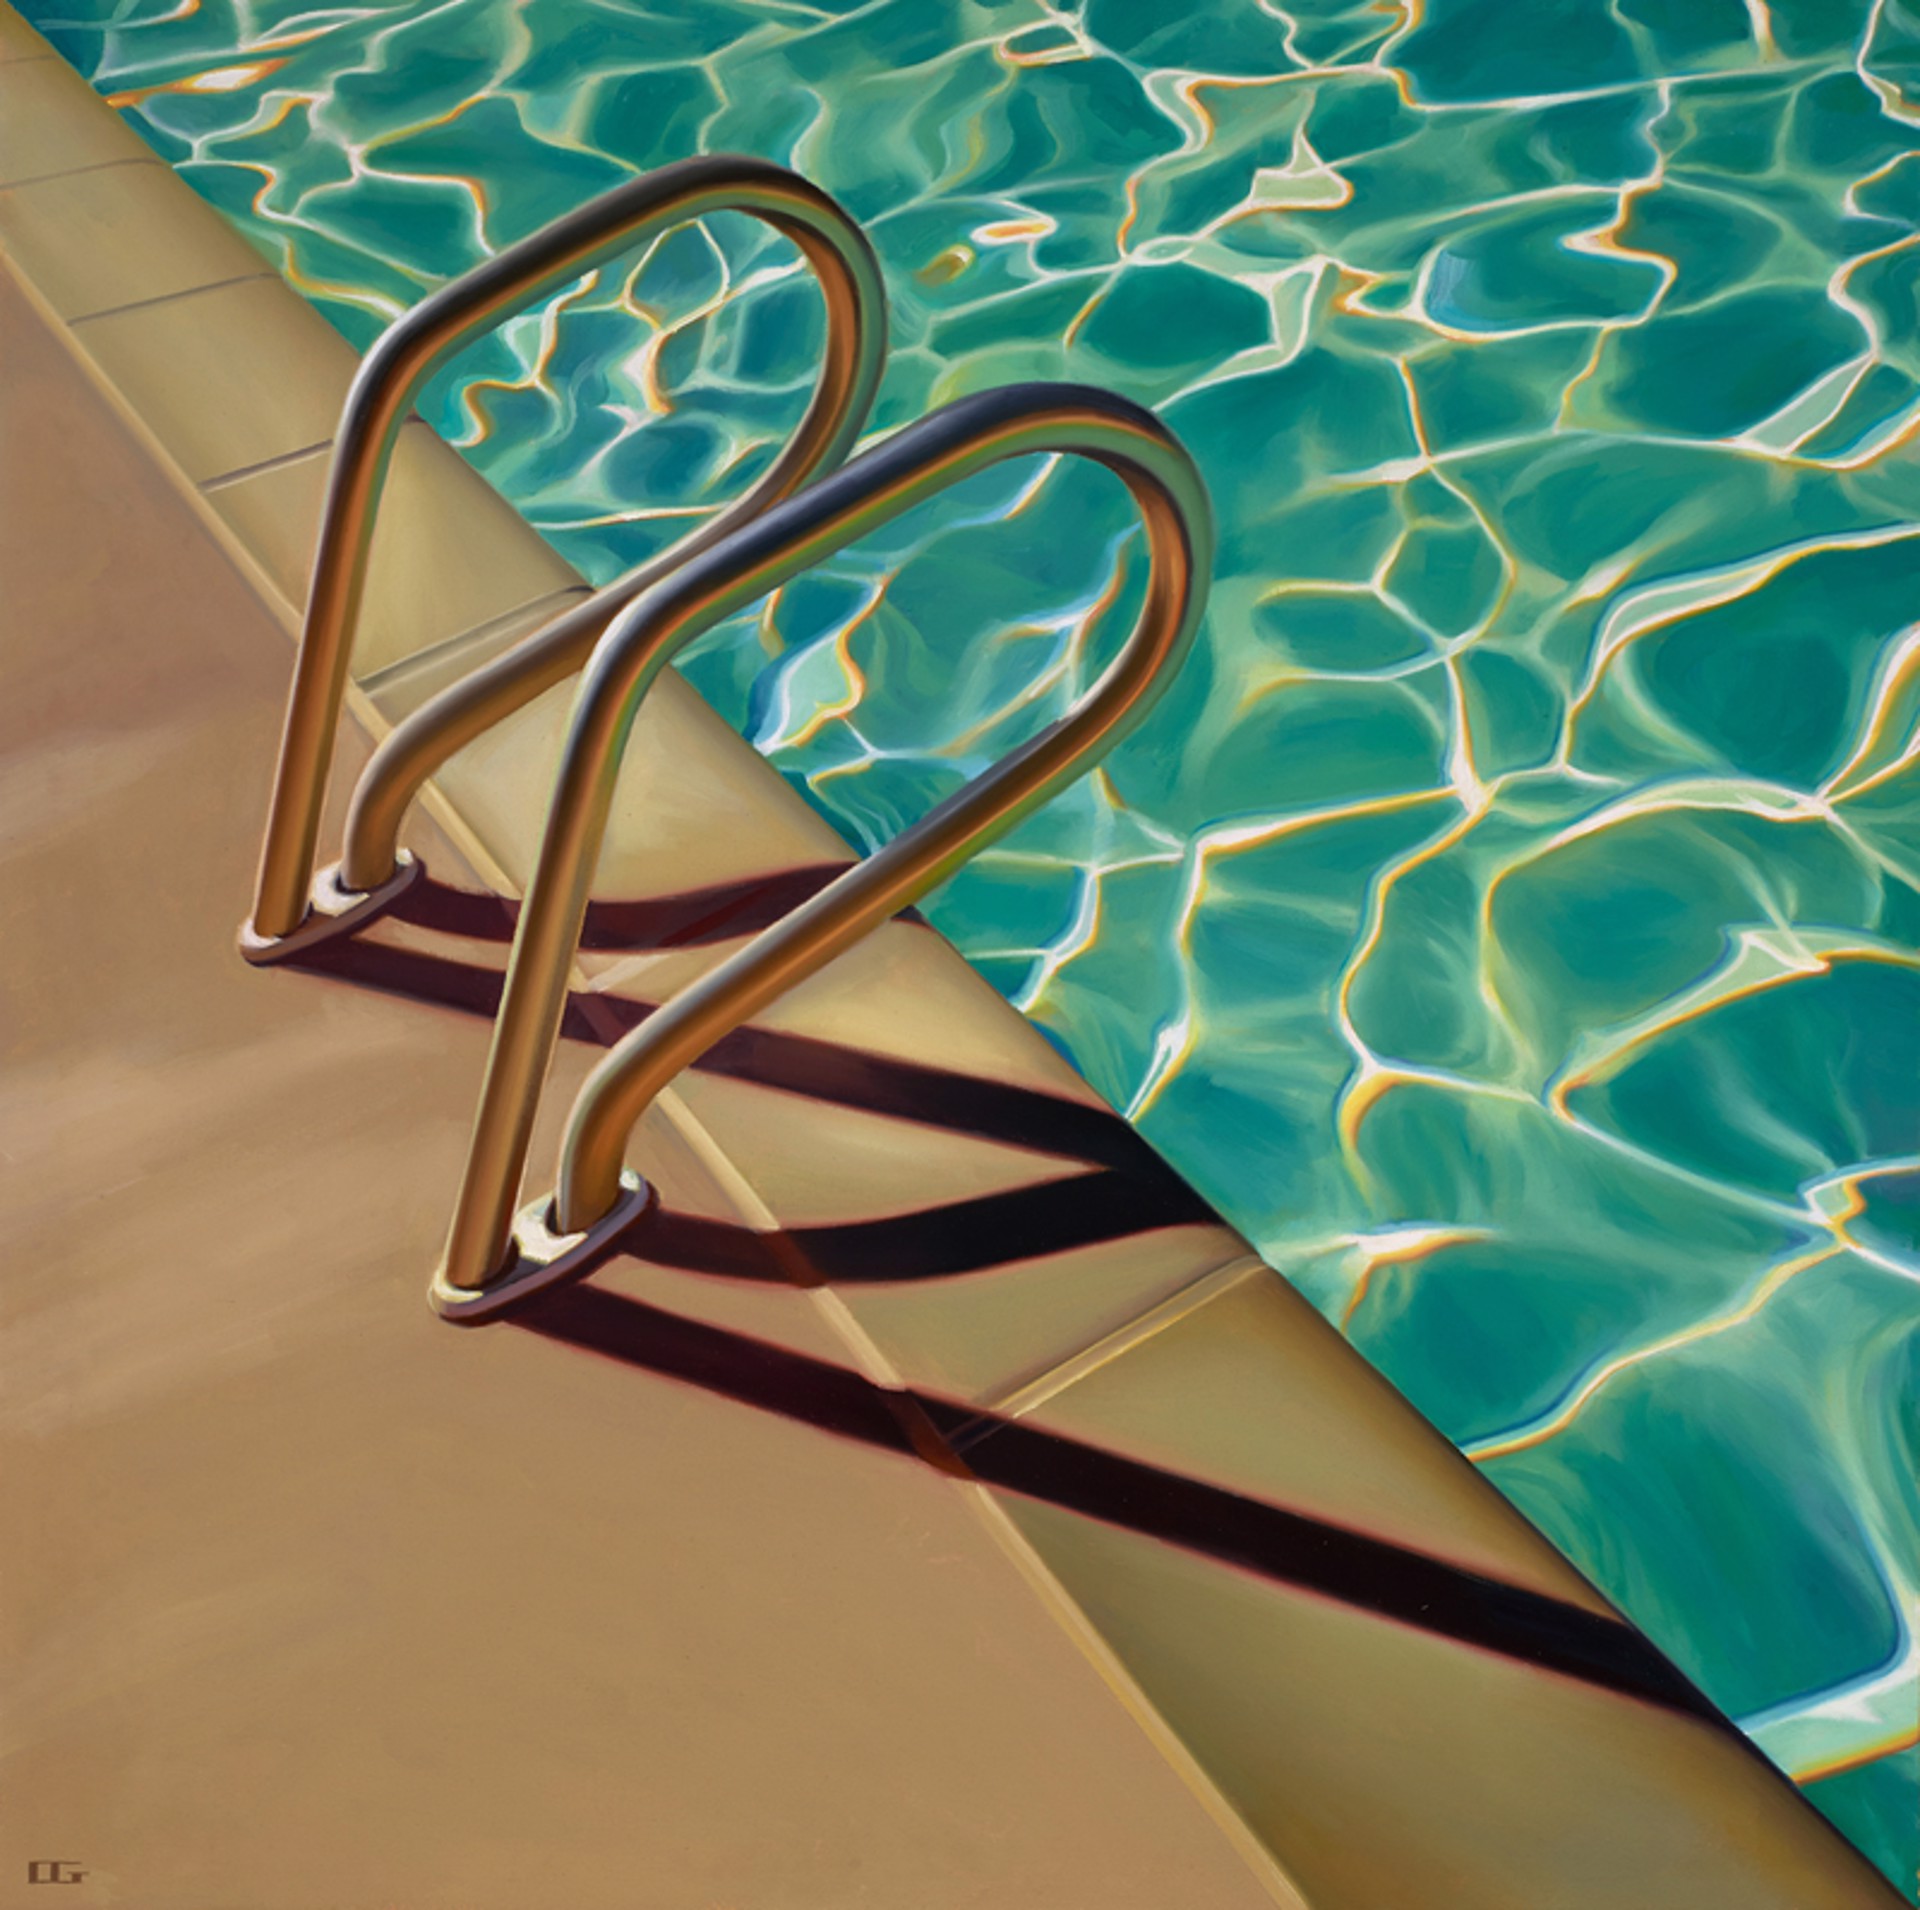 August in the Desert (S/N) by Carrie Graber